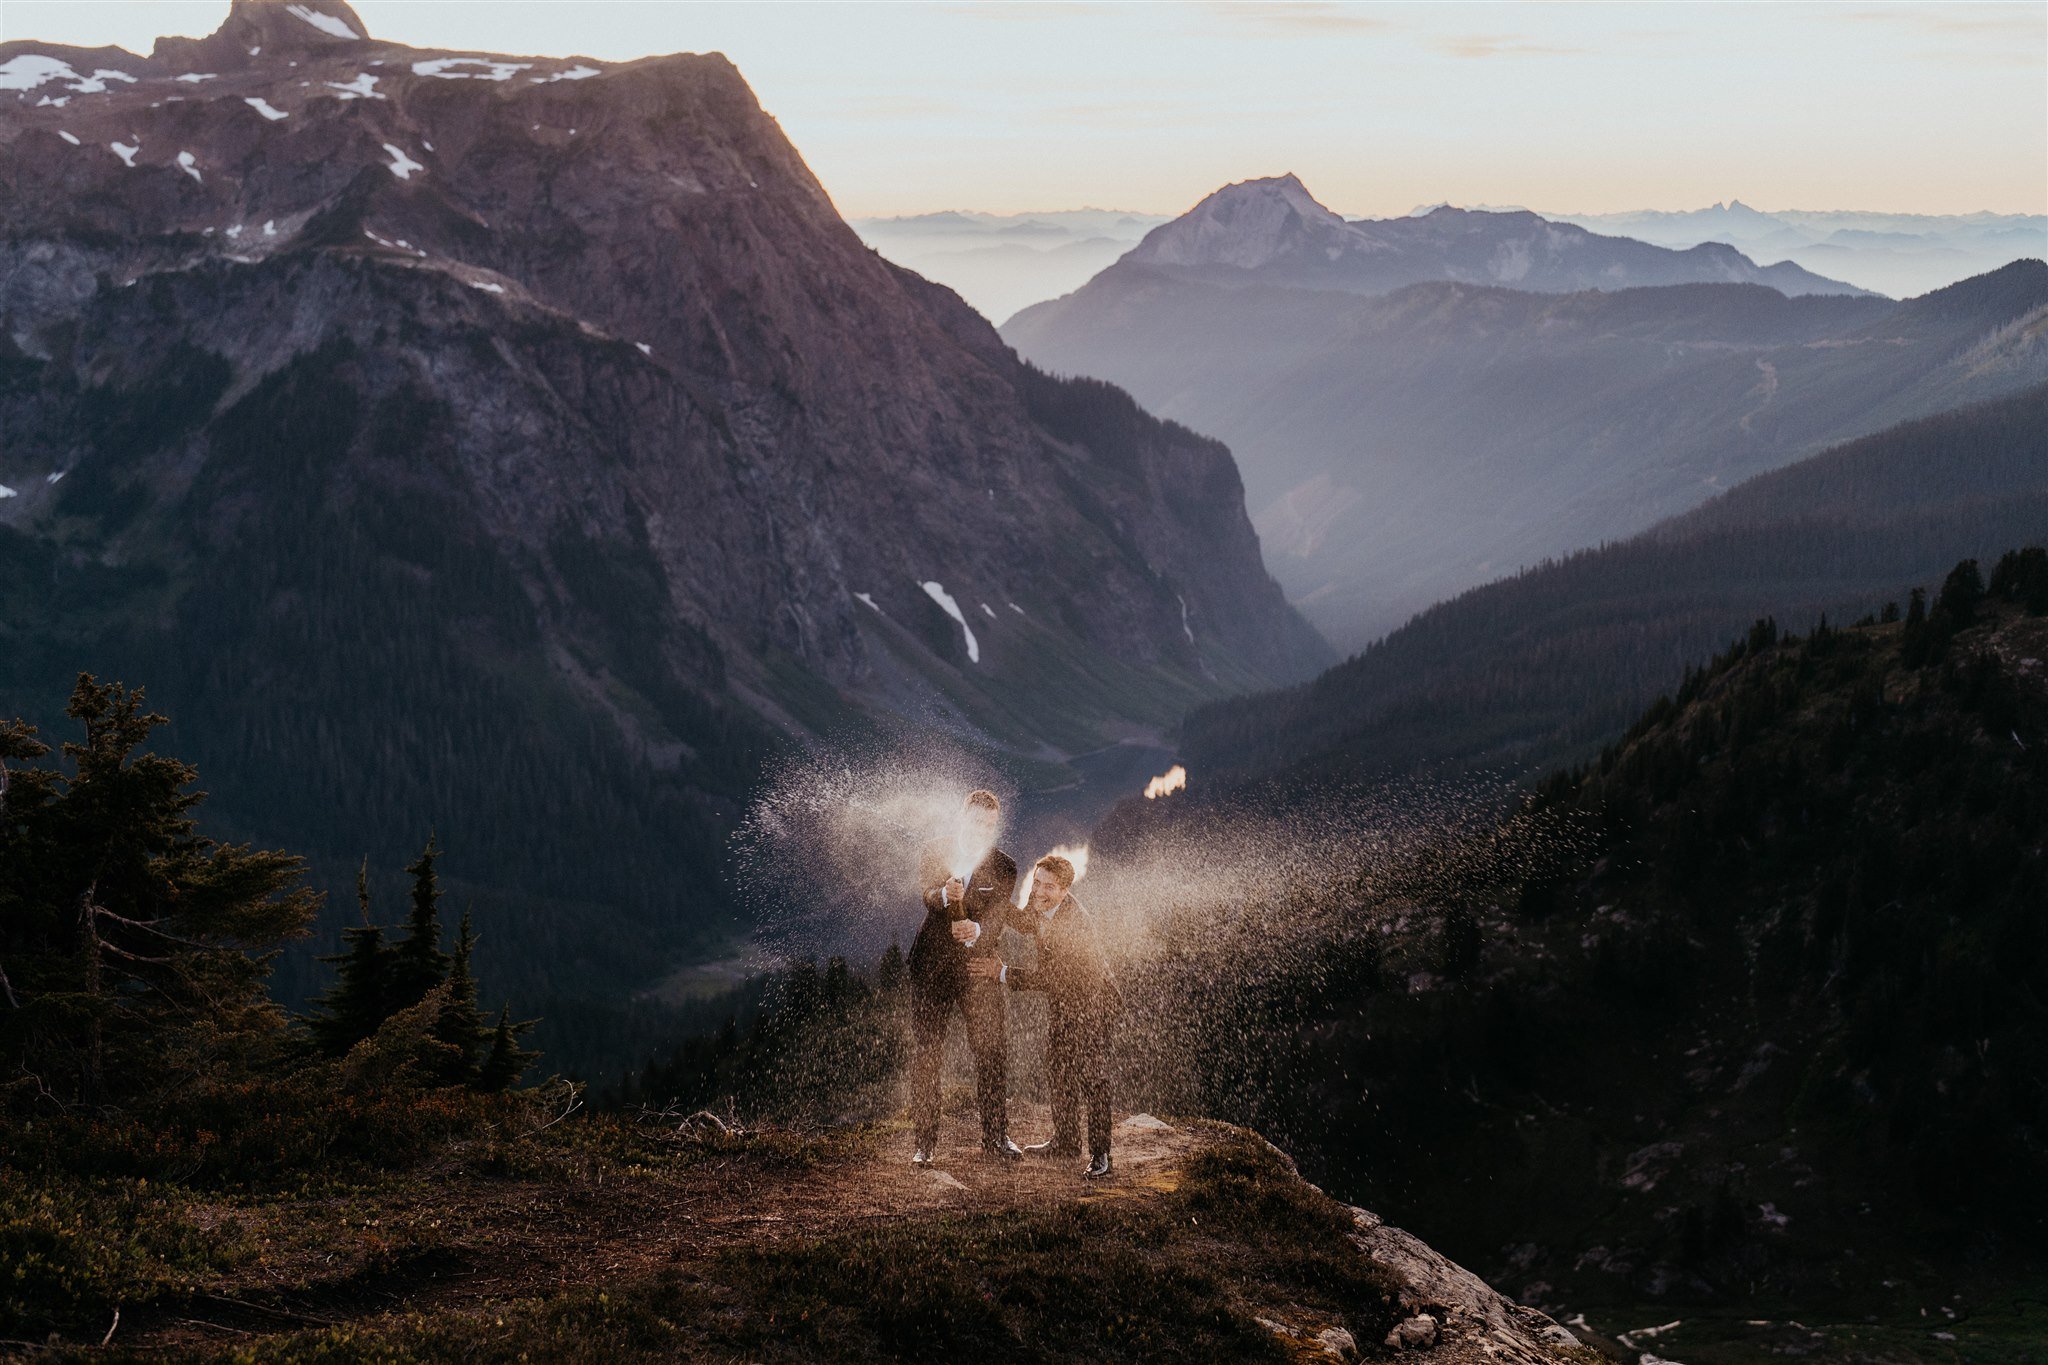 Two grooms adventuring in the North Cascades mountains